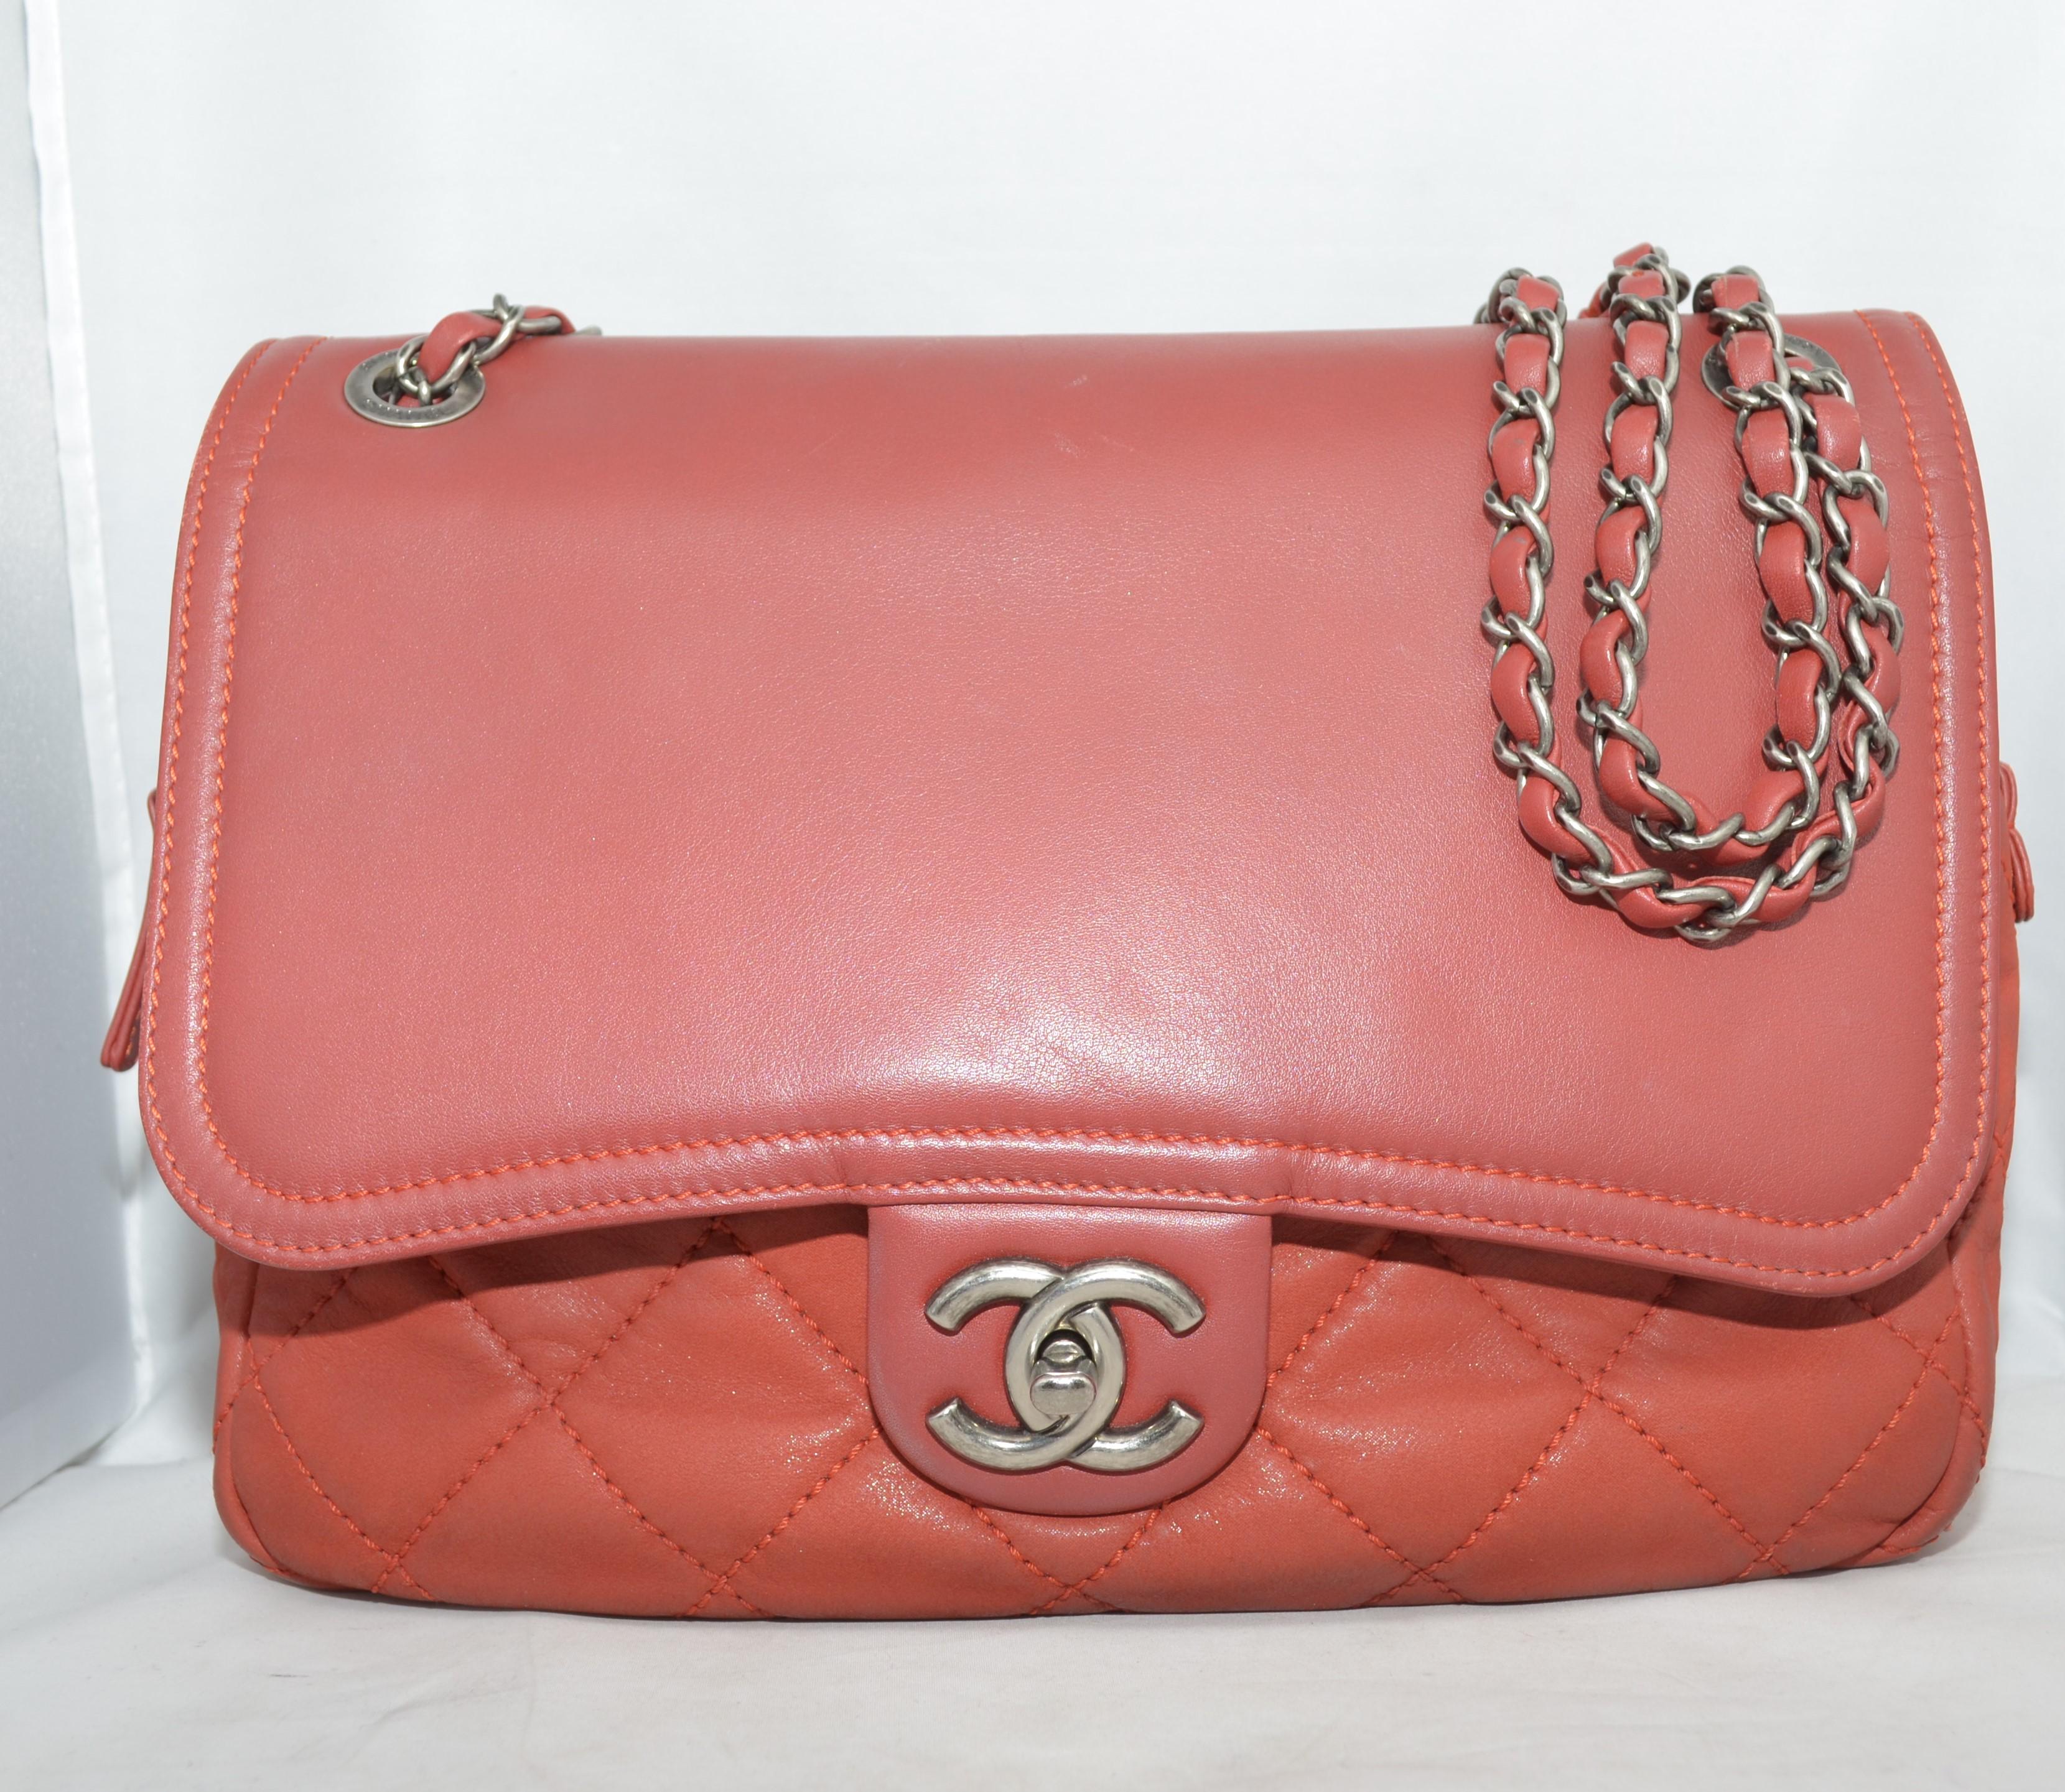 Chanel shoulder bag is featured in a brick red color in a quilted soft crumpled leather base and a nappa leather flap. Bag has gunmetal hardware throughout with a signature CC turnlock closure and zippered top. Interior has a full jacquard lining